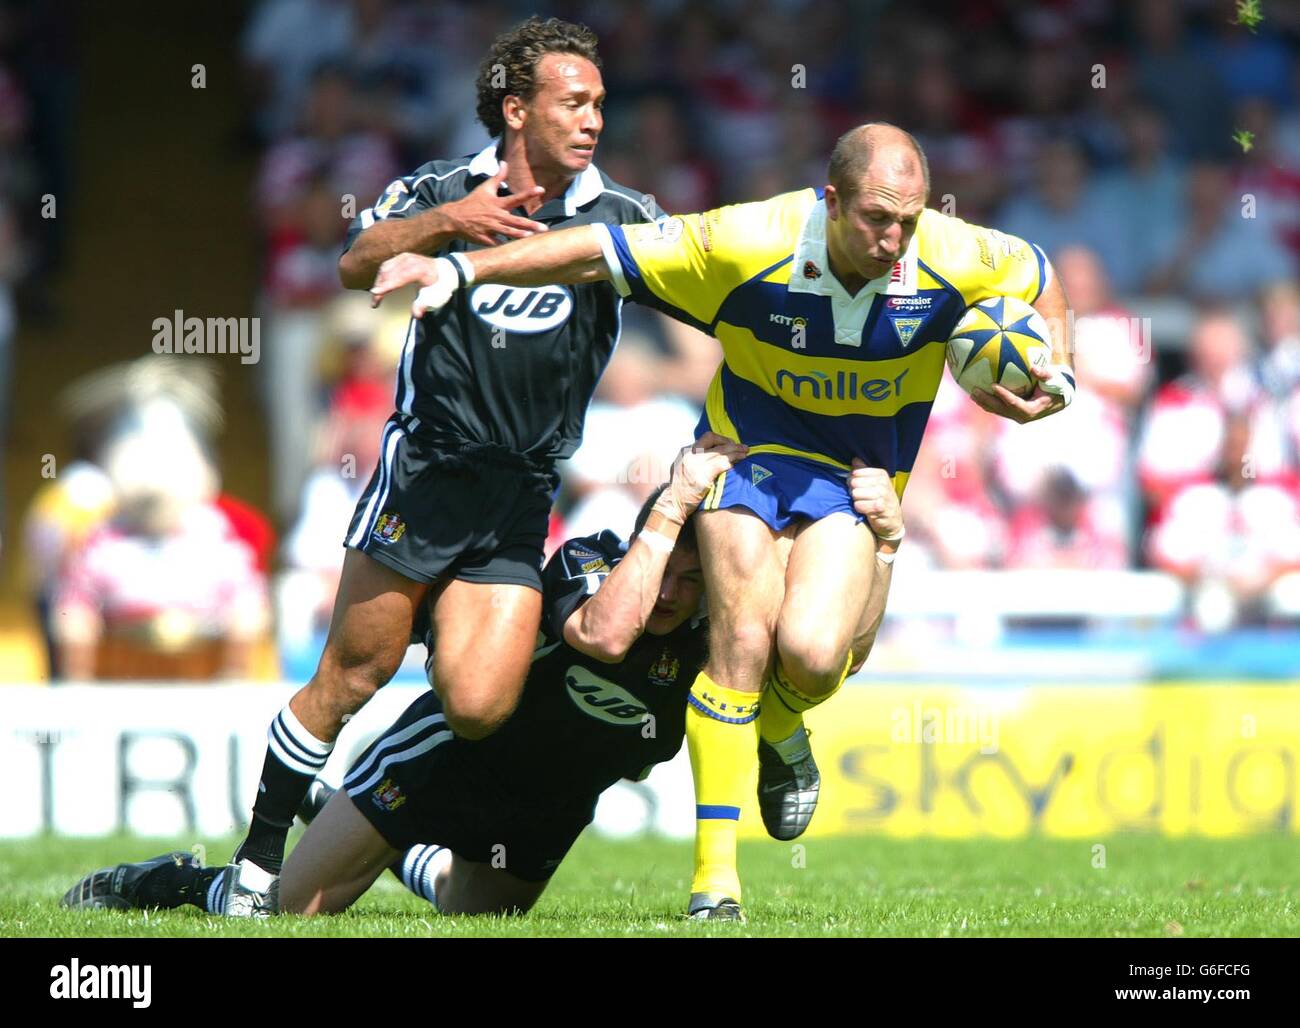 Warrington's Darren Burns is tackled by Wigan's Adrian Lam (L) and Martin Aspinwall, during their Tetlys Super League match at the Wilderspool Stadium in Warrington. Stock Photo